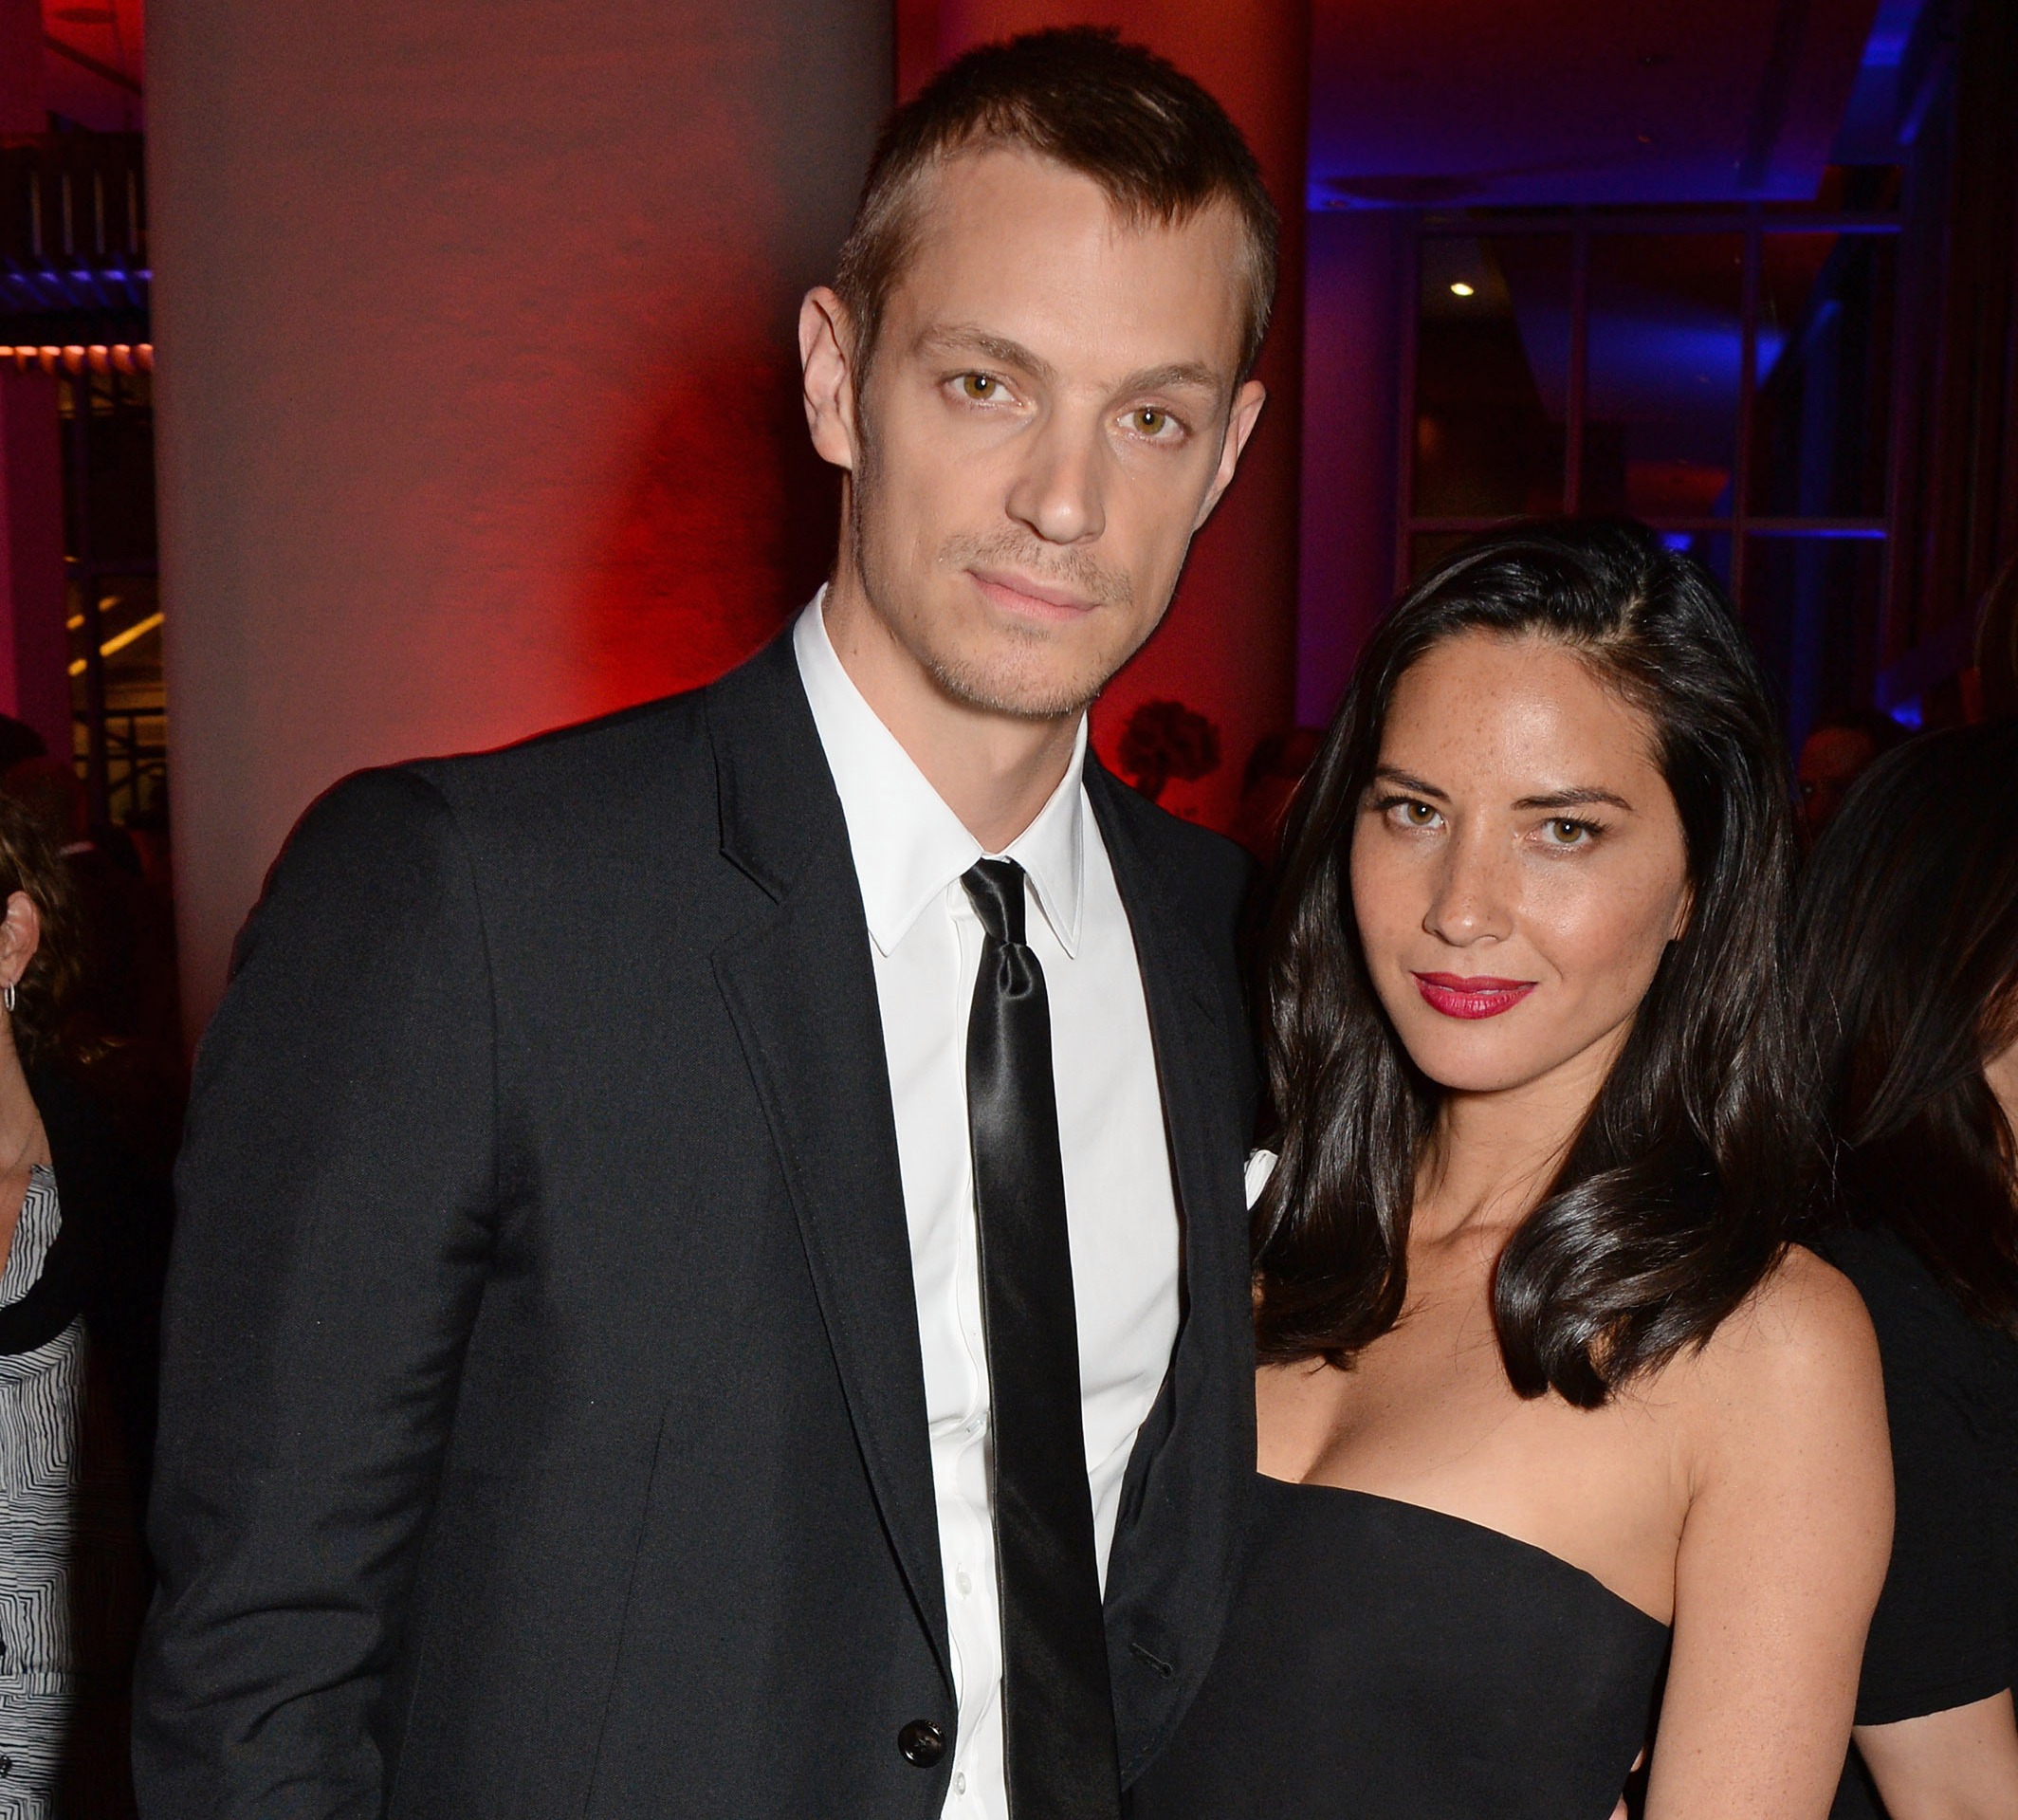 Munn and Joel Kinnaman confirmed their relationship in March 2012.